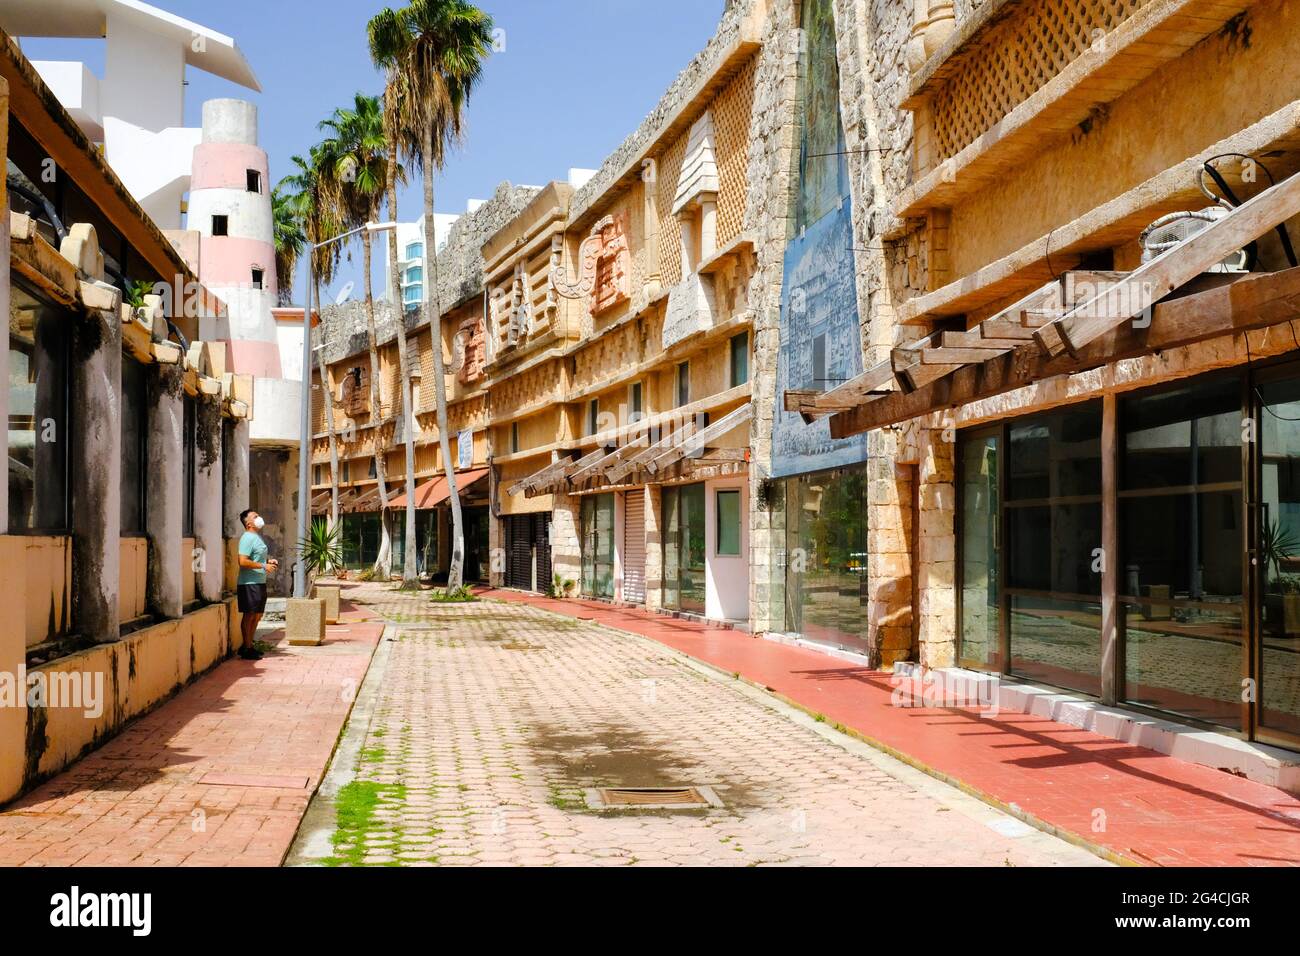 Street with abandoned buildings and businesses in Cancun, Mexico. The Mexican tourist town has been economically devastated by the Covid-19 Pandemic. Many businesses catering to tourists have not been able to survive the sanitary restrictions and the sharp drop in tourism. Stock Photo